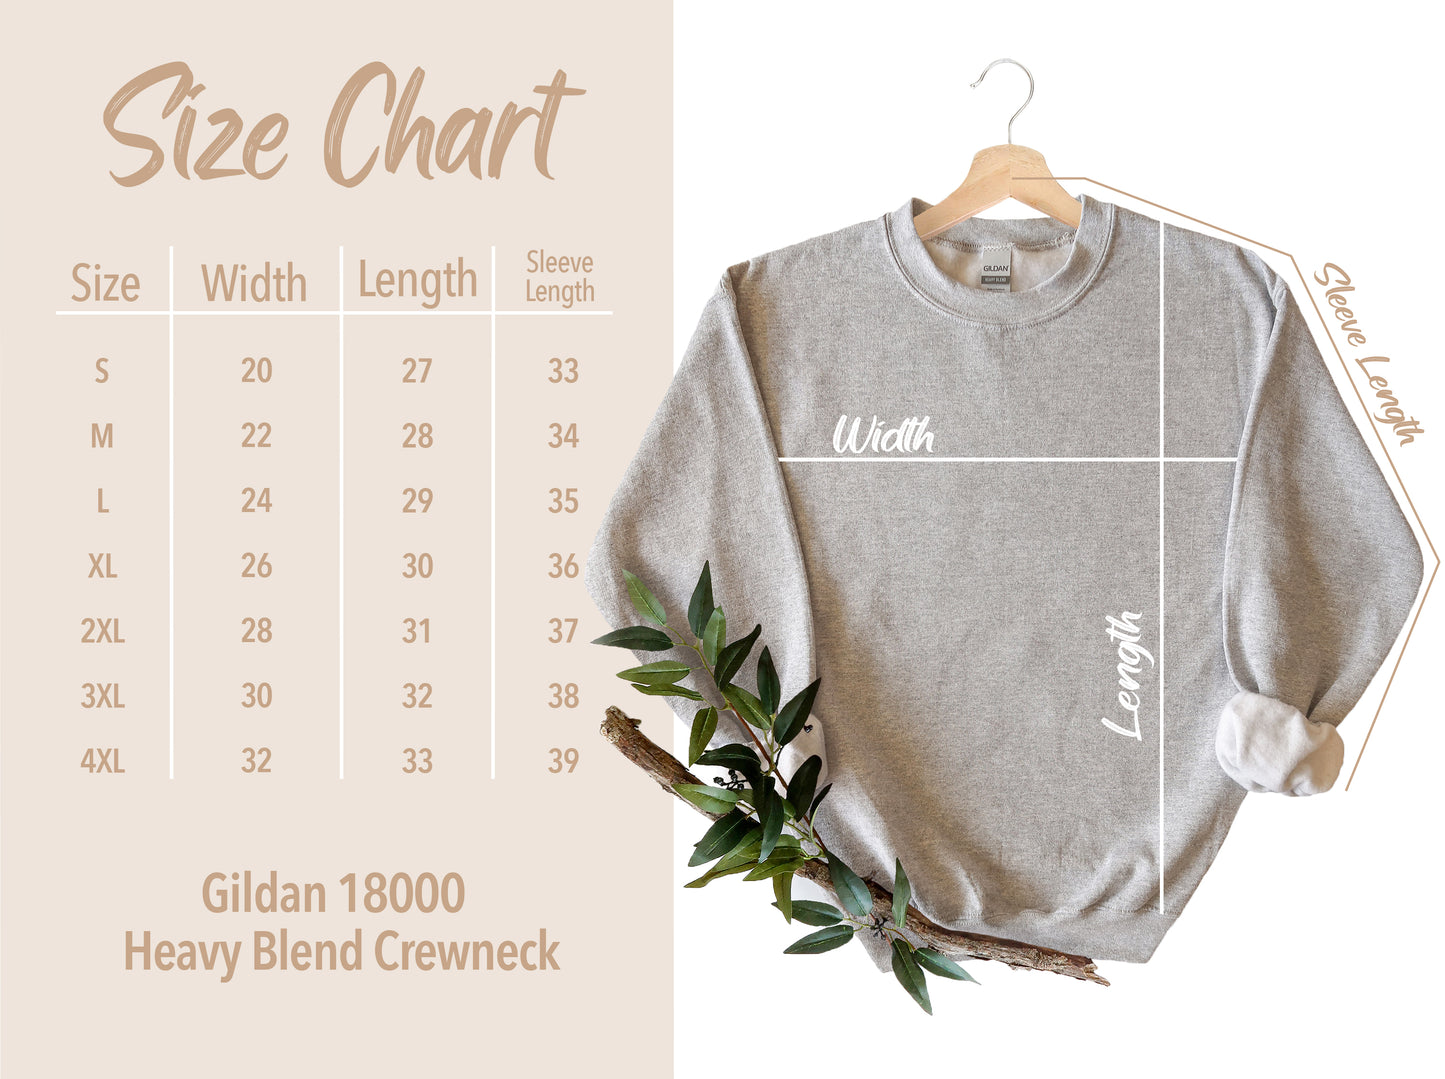 Let Me Make Something Very Very Clear... Your Skin Crewneck